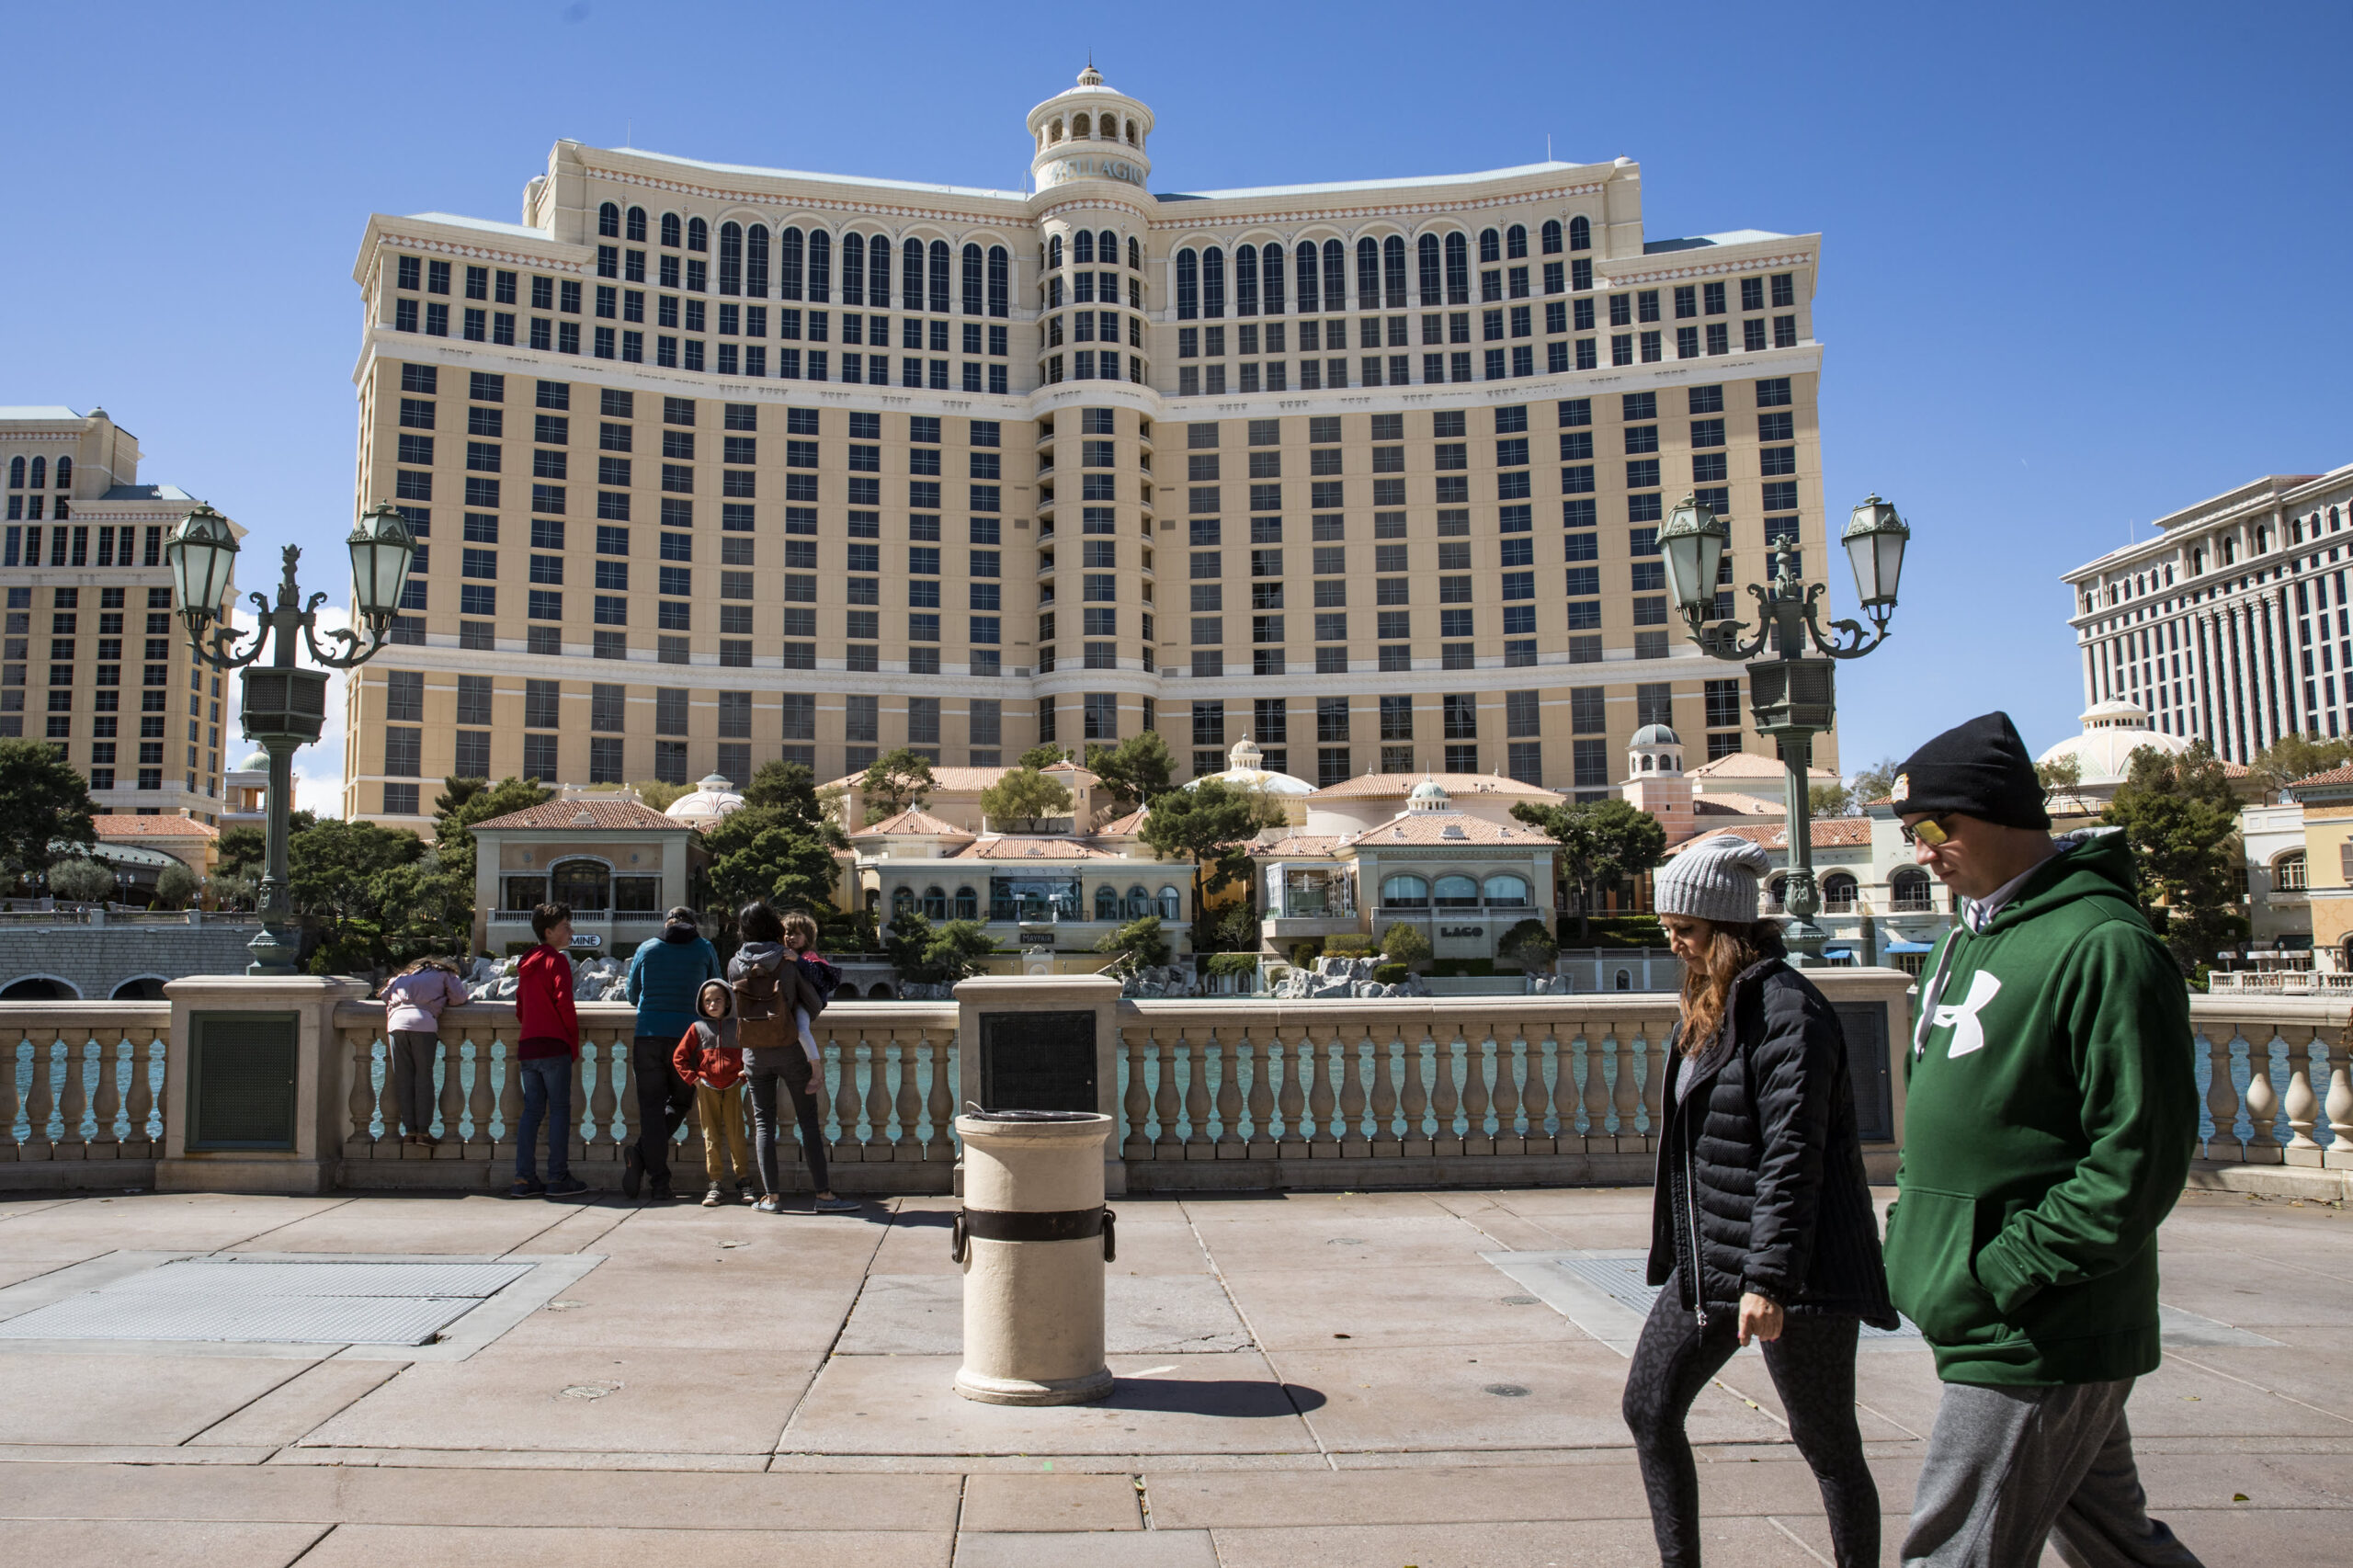 MGM Resorts cybersecurity incident forces system outage